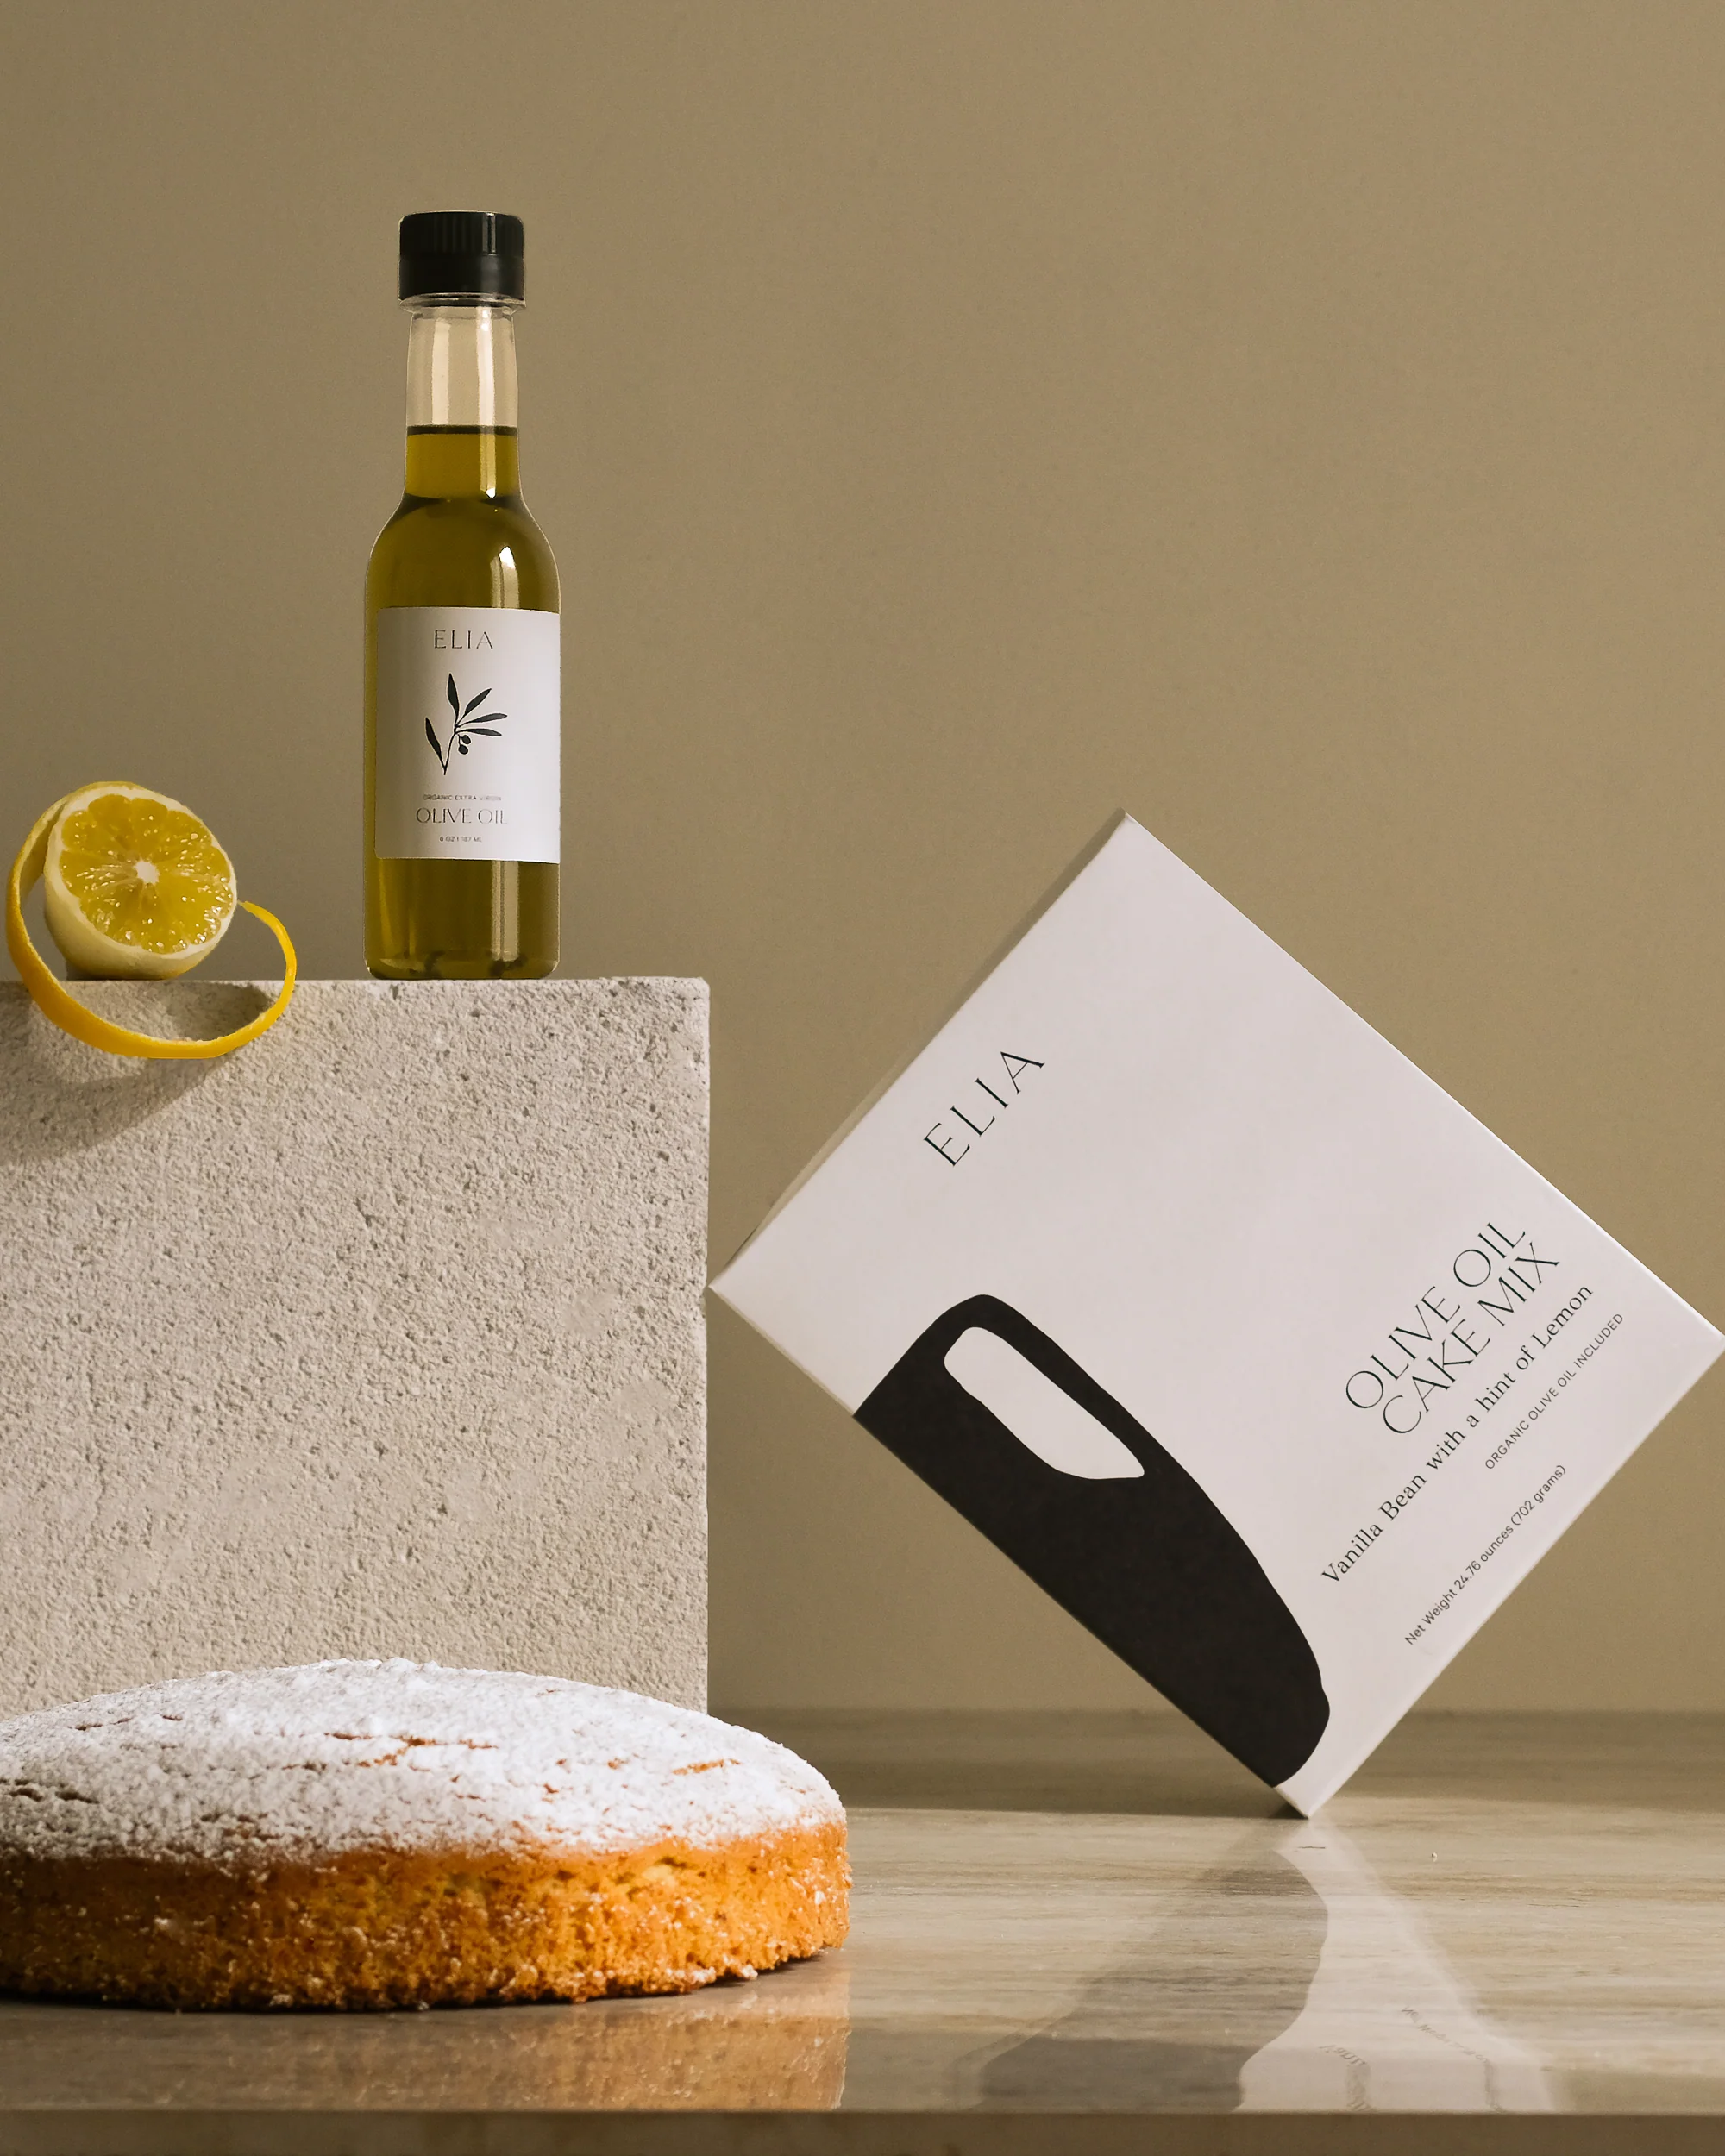 Vanilla with a hint of Lemon Olive Oil Cake: The Classic.